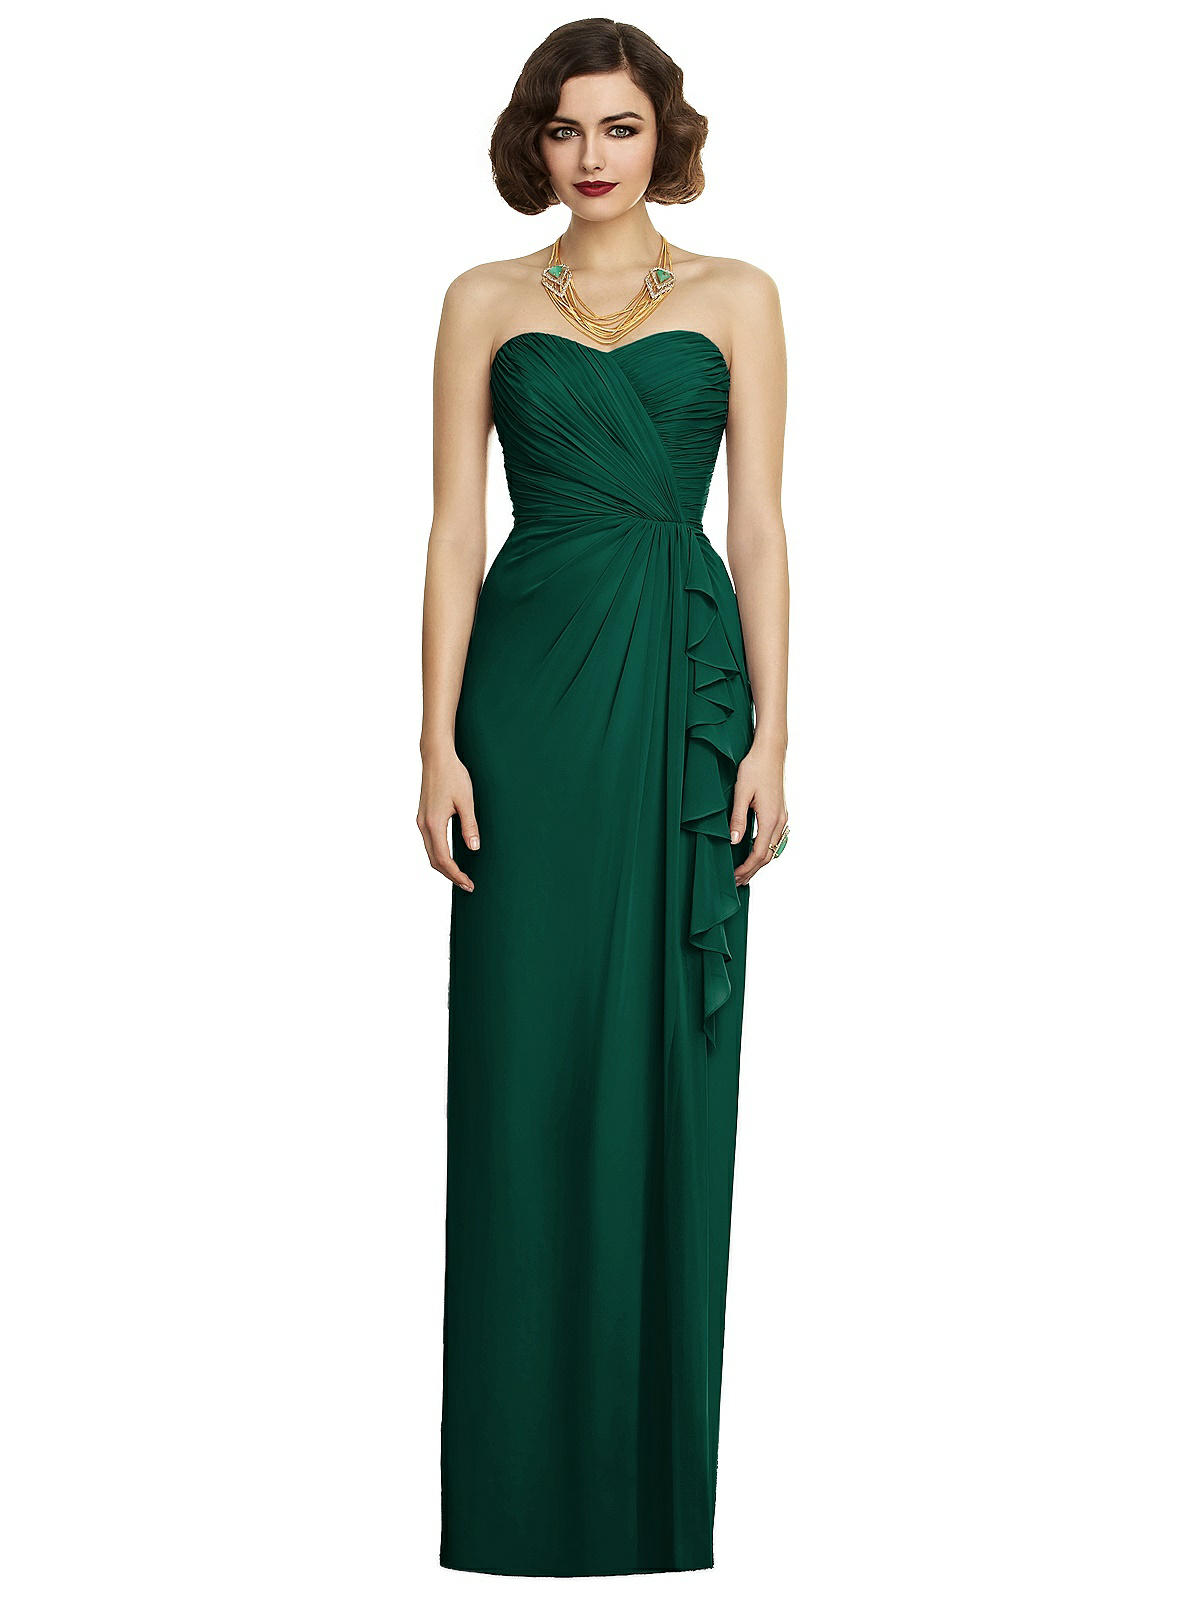 Dessy Collection Bridesmaid Dress 2895 | The Dessy Group